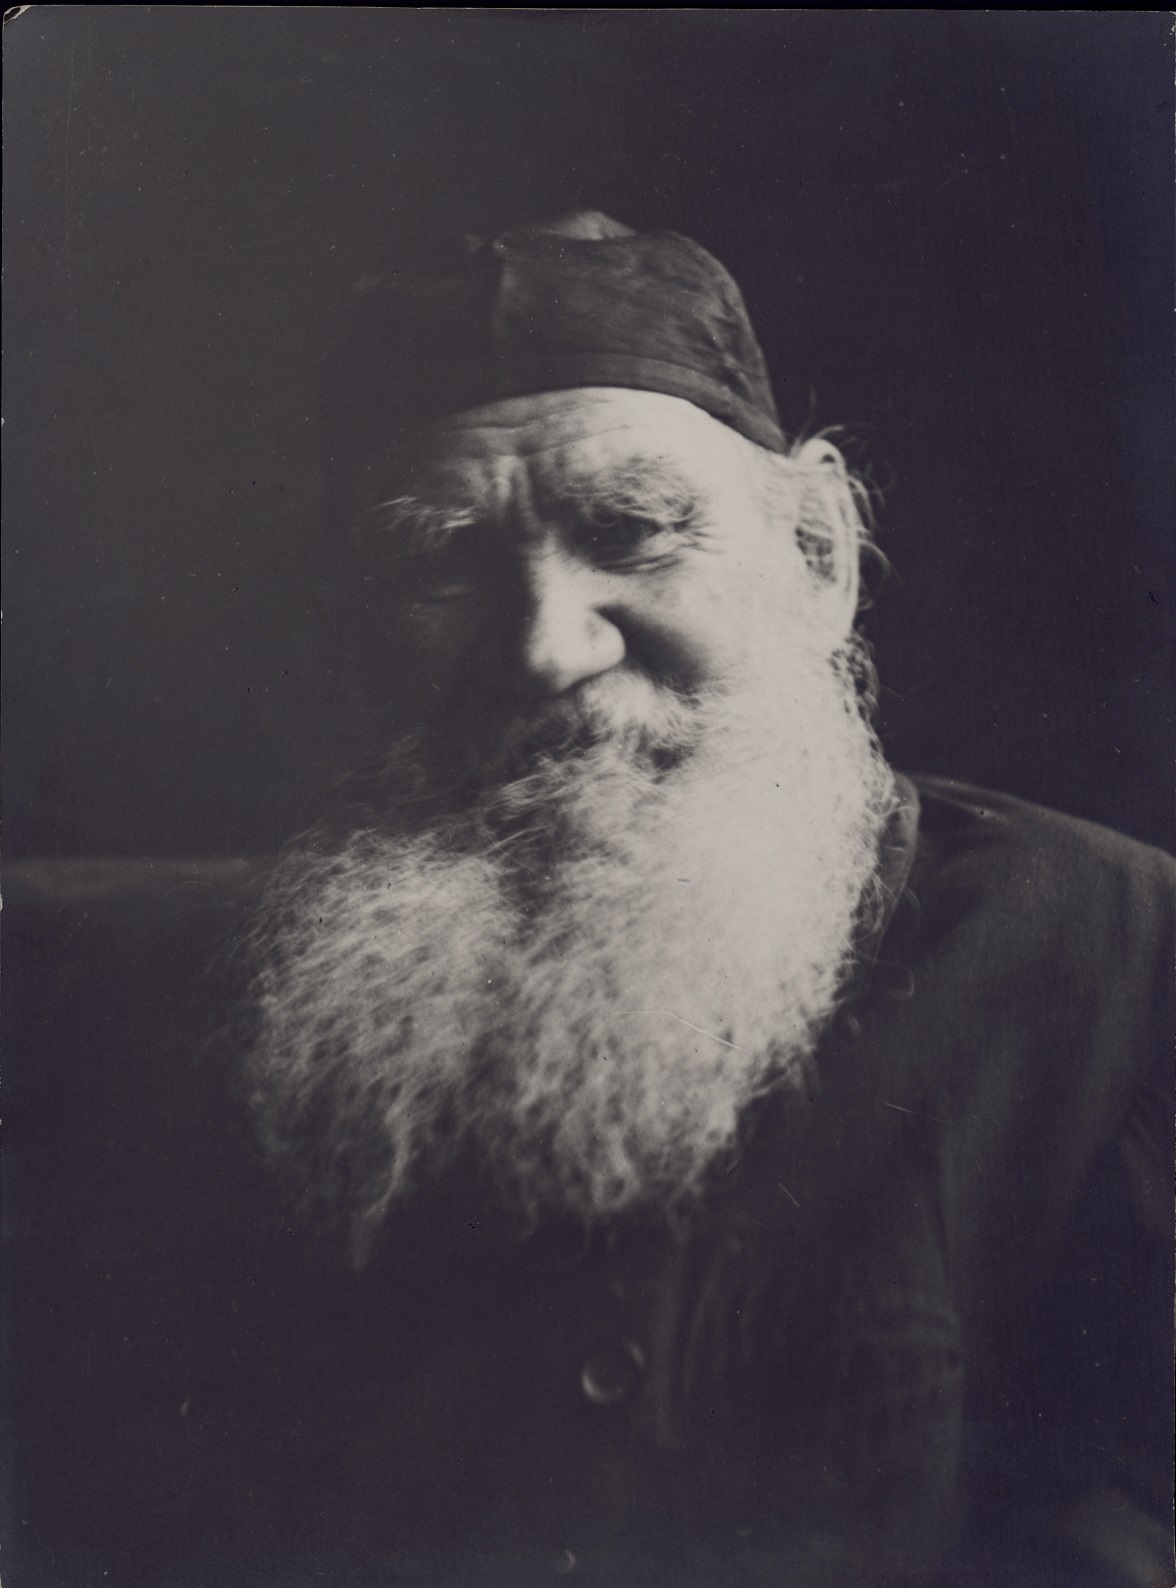 Among all the literary pieces written by Leo Tolstoy, 174 have been preserved, including unfinished essays and drafts. One might think that to accomplish such amount of work he had to write around the clock. However, Tolstoy’s life was incredibly diverse. // Photo from the series by Vladimir Chertkov, Yasnaya Polyana